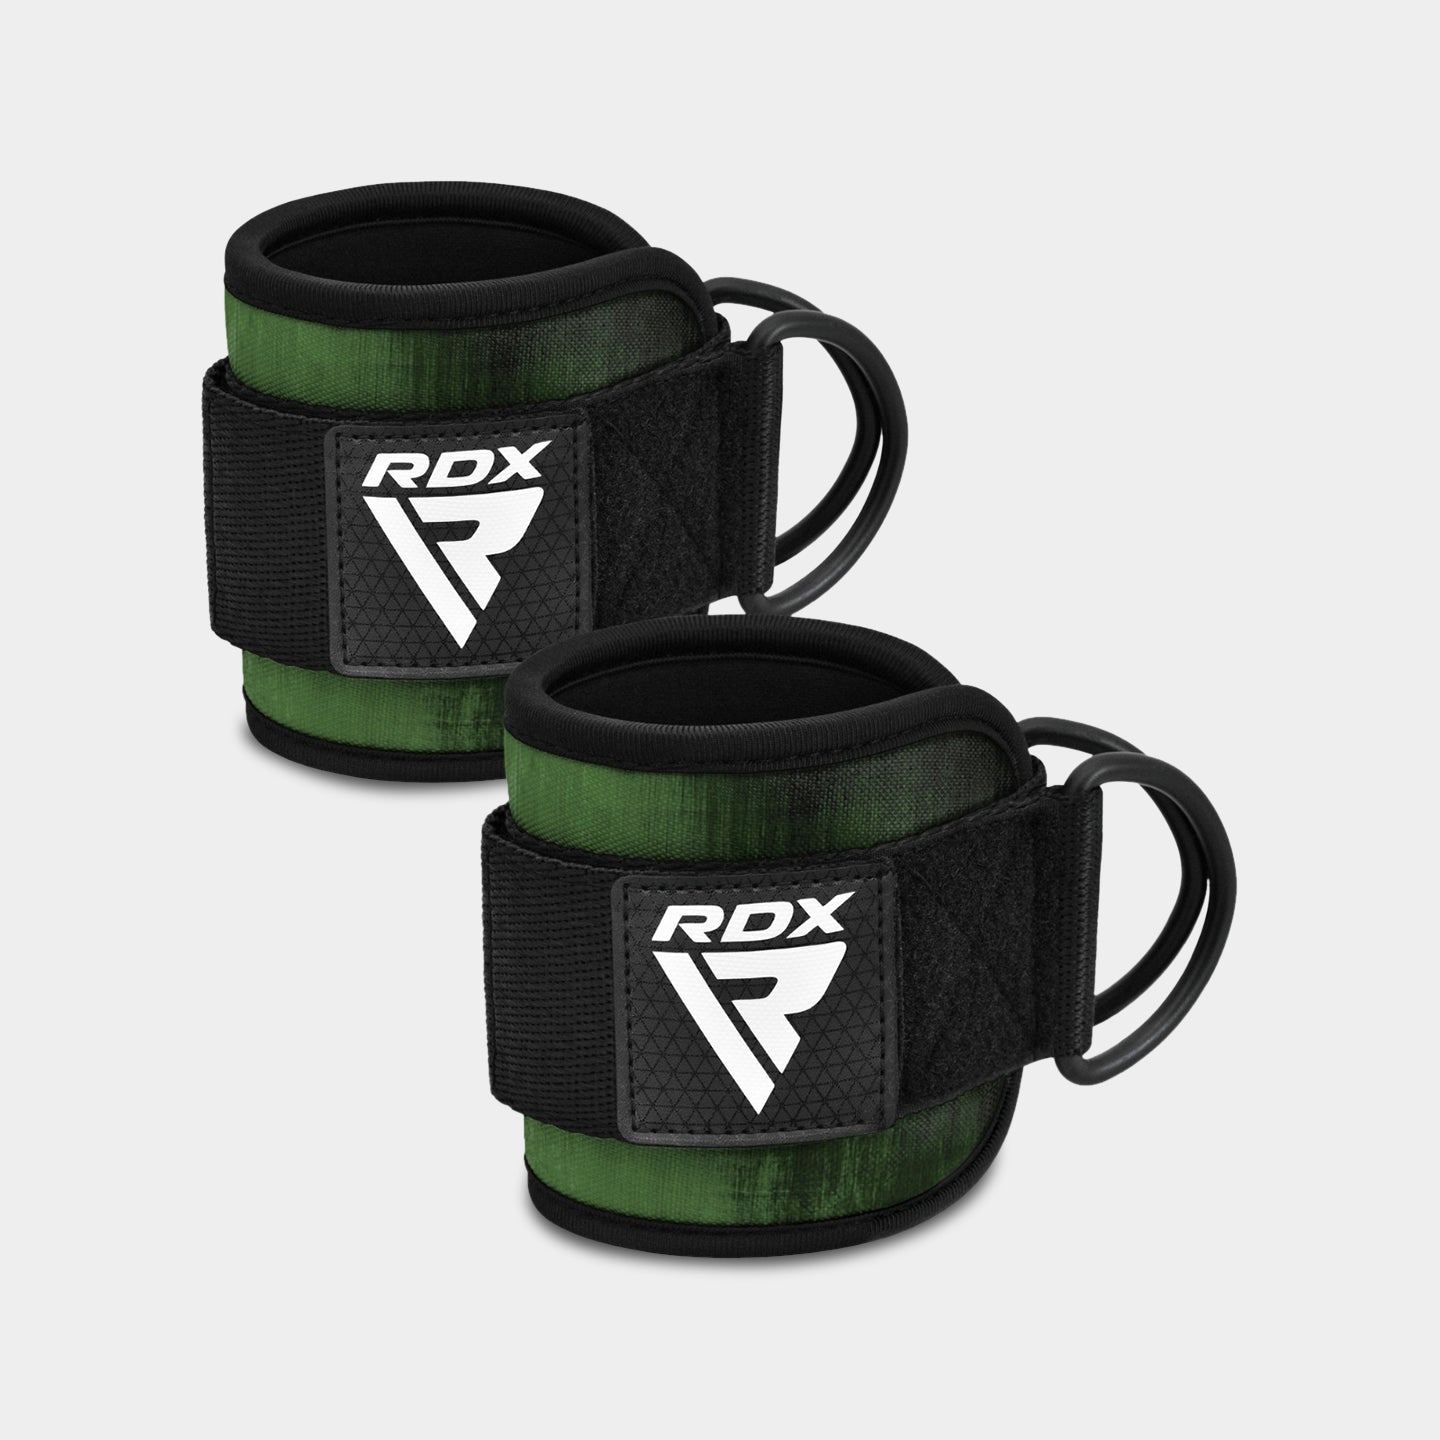 RDX Sports A4 Ankle Straps For Gym Cable Machine A1